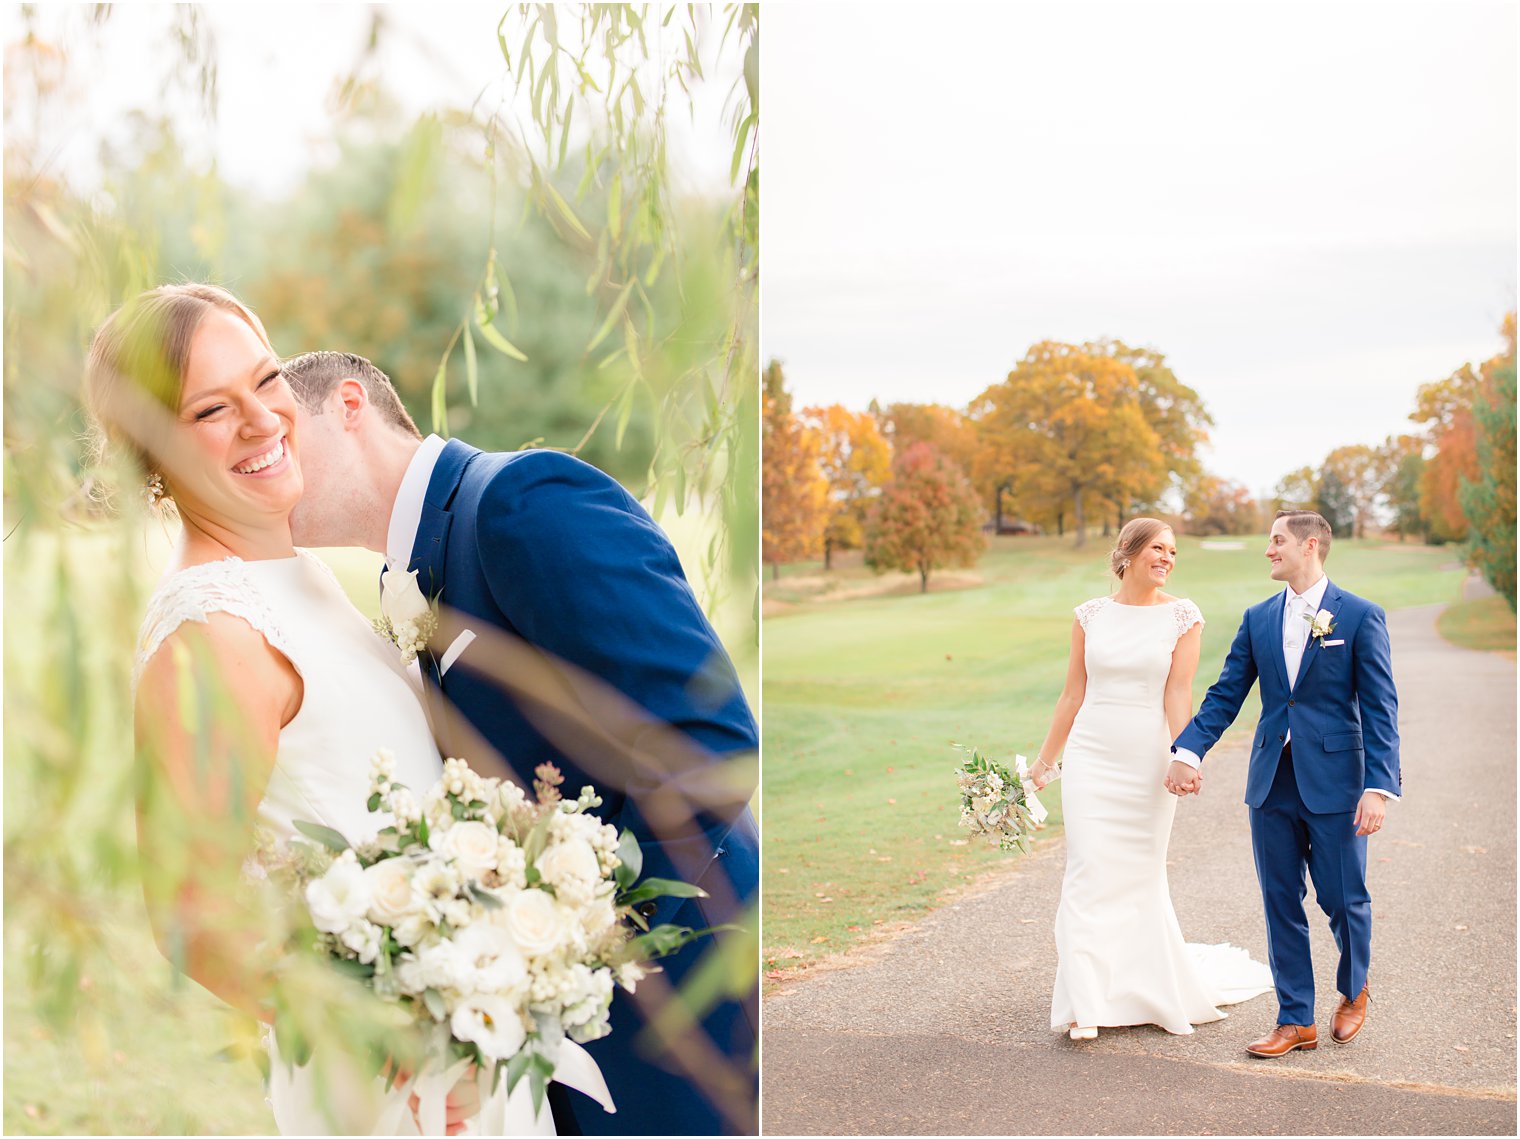 romantic New York Country Club wedding day photographed by Idalia Photography